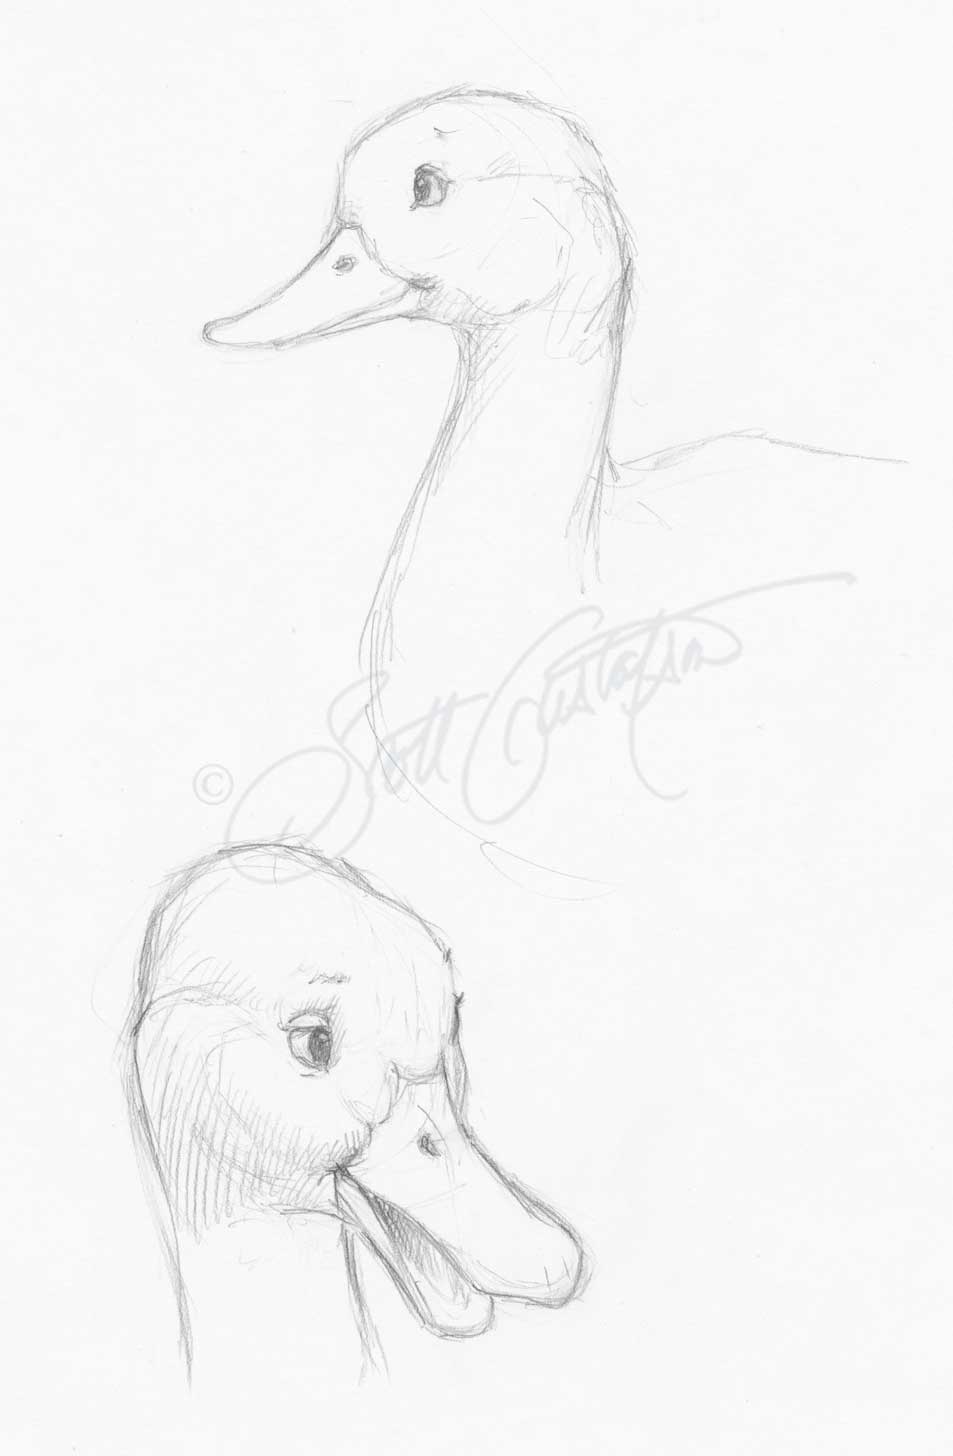 Adorable Art Learn How to Draw and Paint a Duckling  Craftsy   wwwcraftsycom